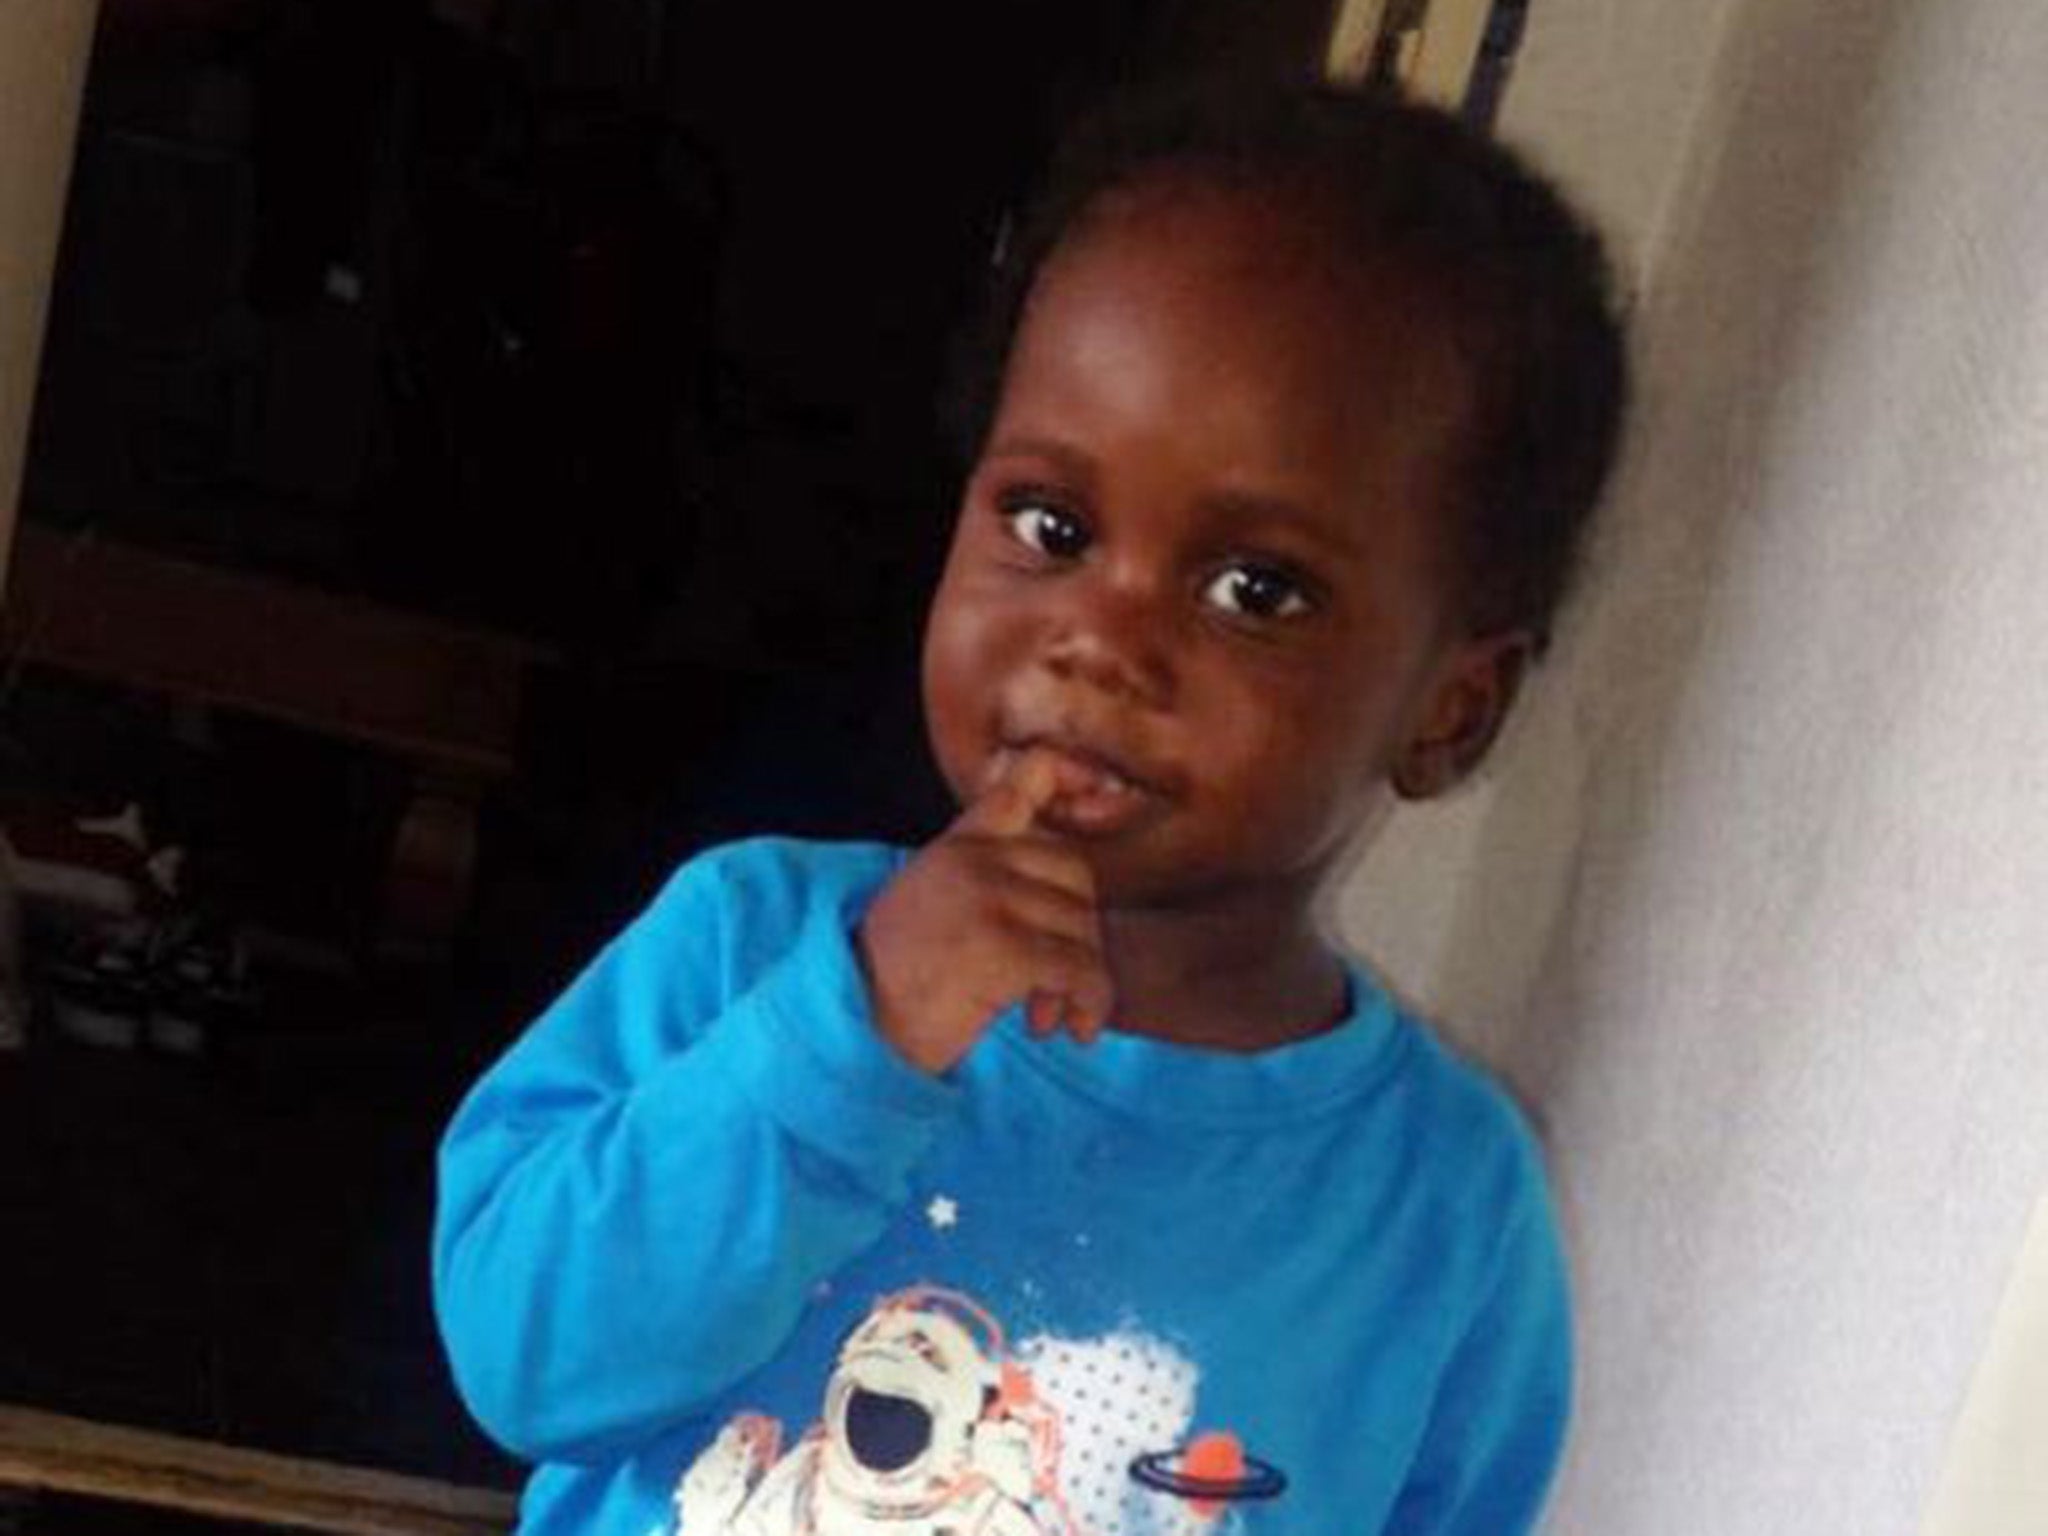 Three-year-old Kemarni Watson Darby died after he was found lifeless at his home in West Bromwich in June 2019